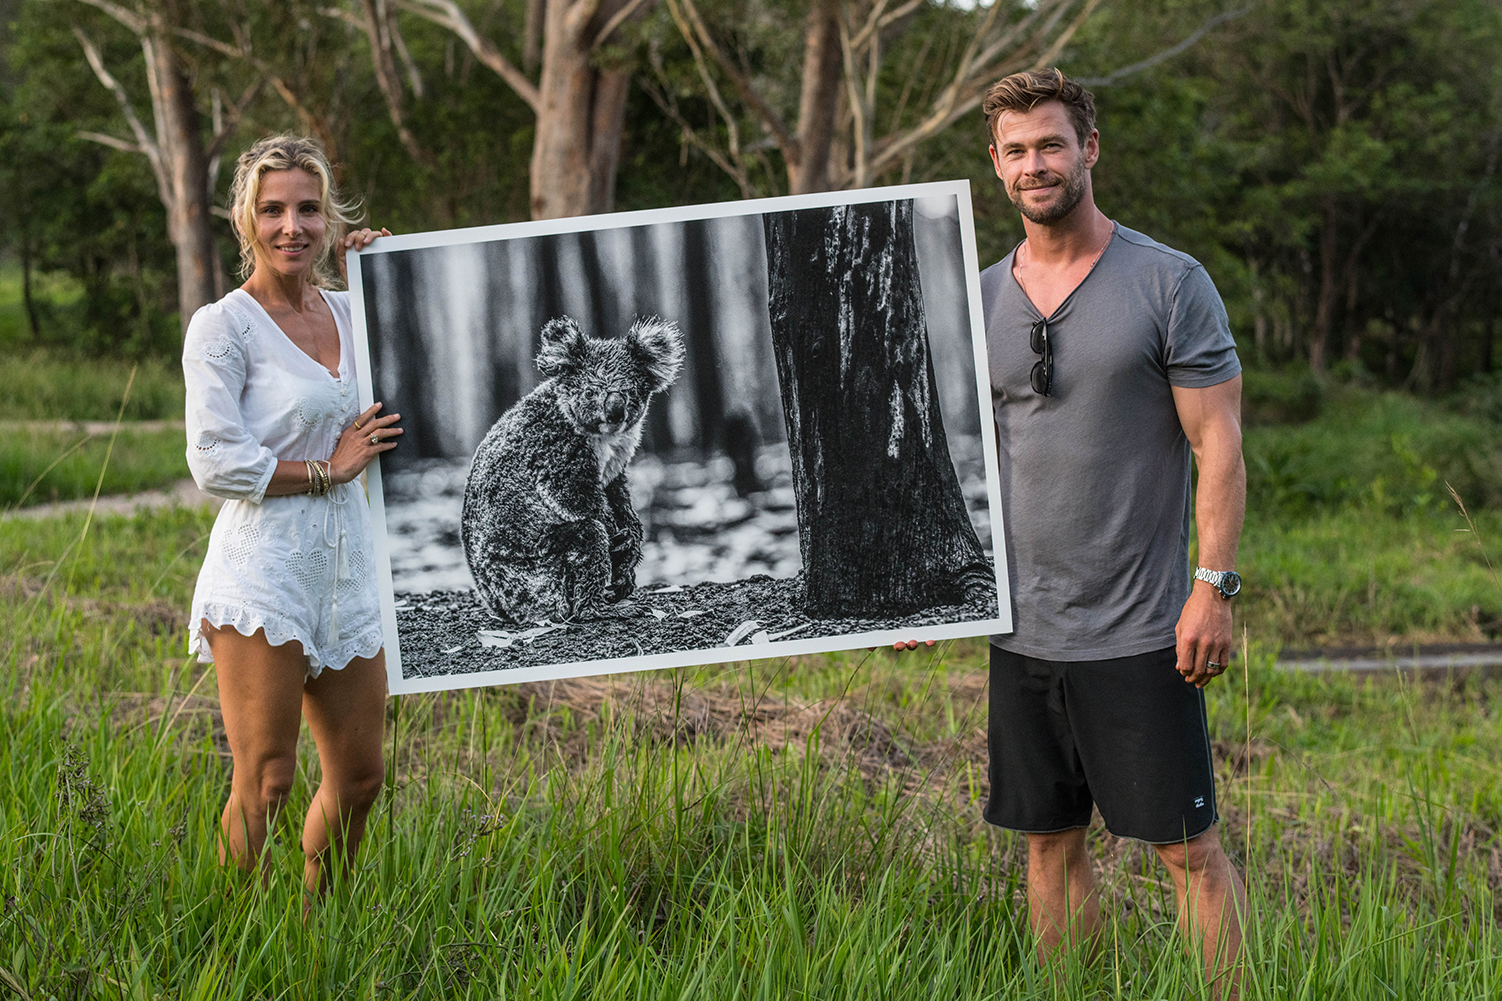 Elsa Pataky and husband Chris Hemsworth with David Yarrow’s photo “Survivor,” of a lone koala, which helped raise money for Australian wildfire recovery.